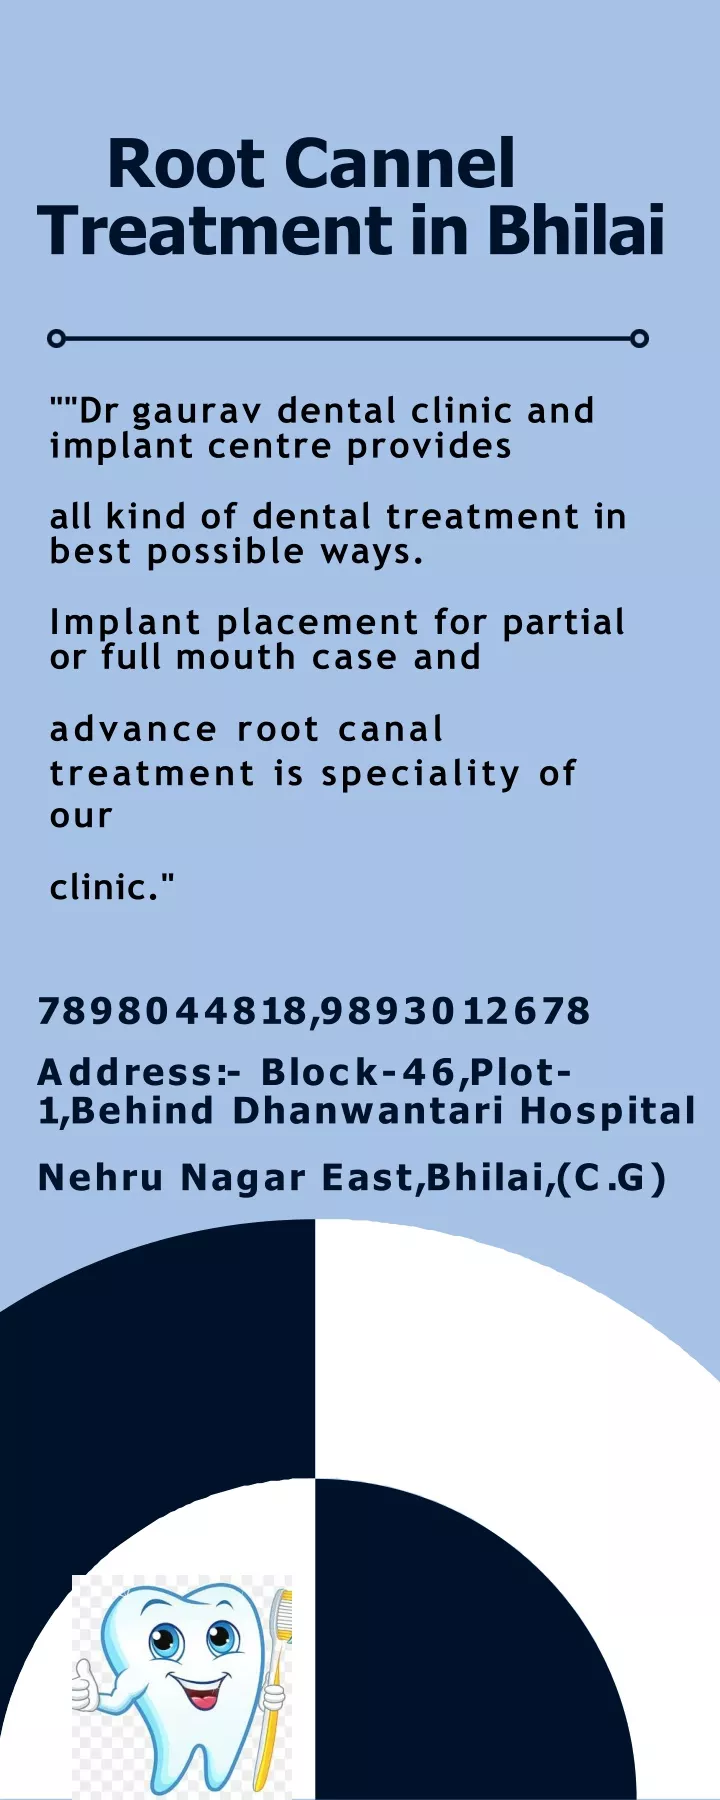 root cannel treatment in bhilai